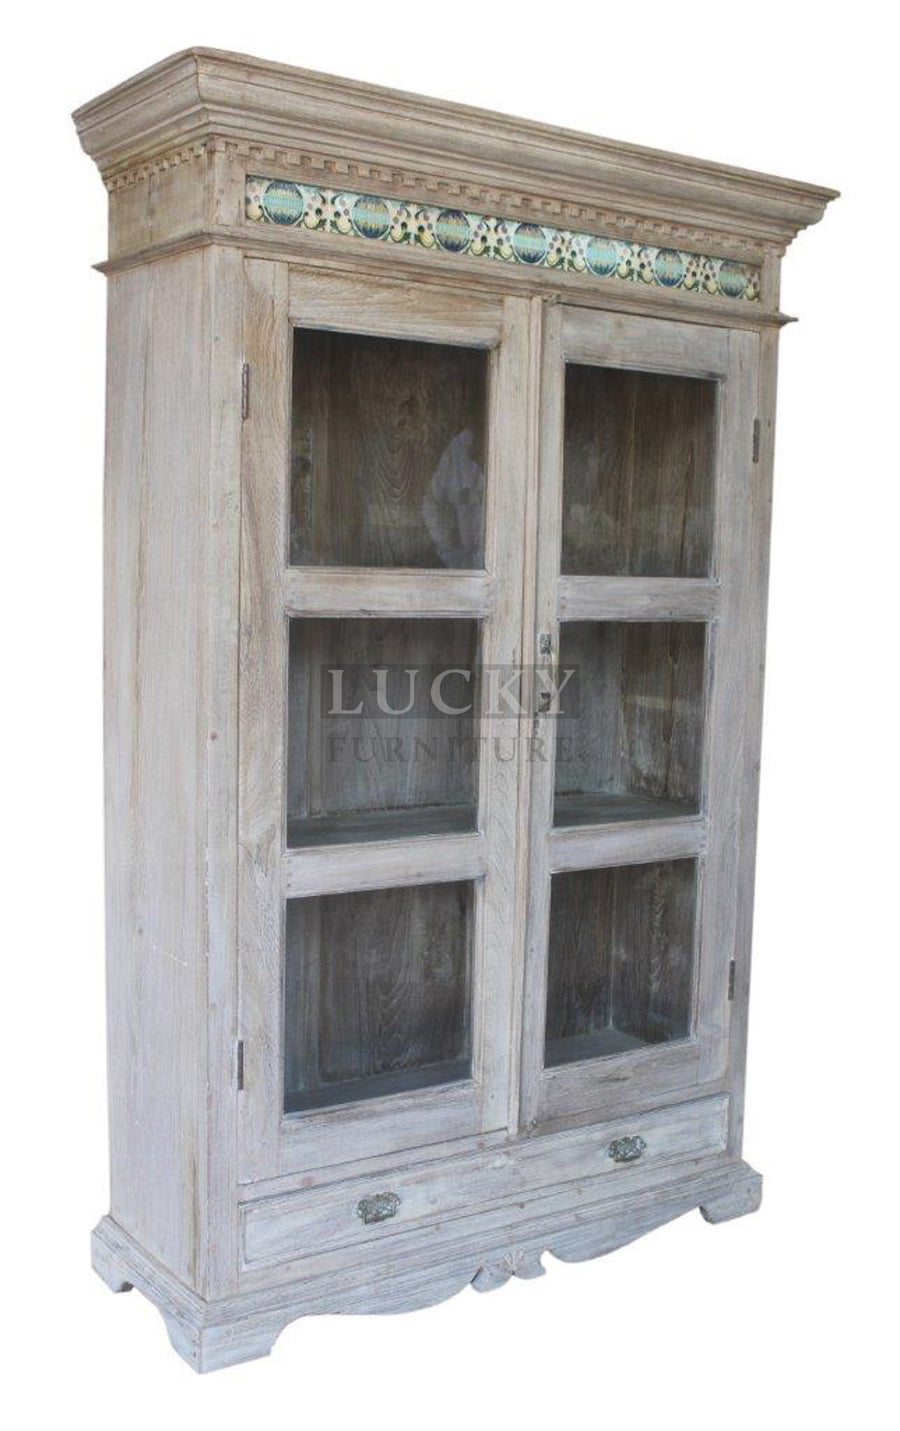 Vintage Victorian Style Teak wood bleached glass cabinet with tiled work